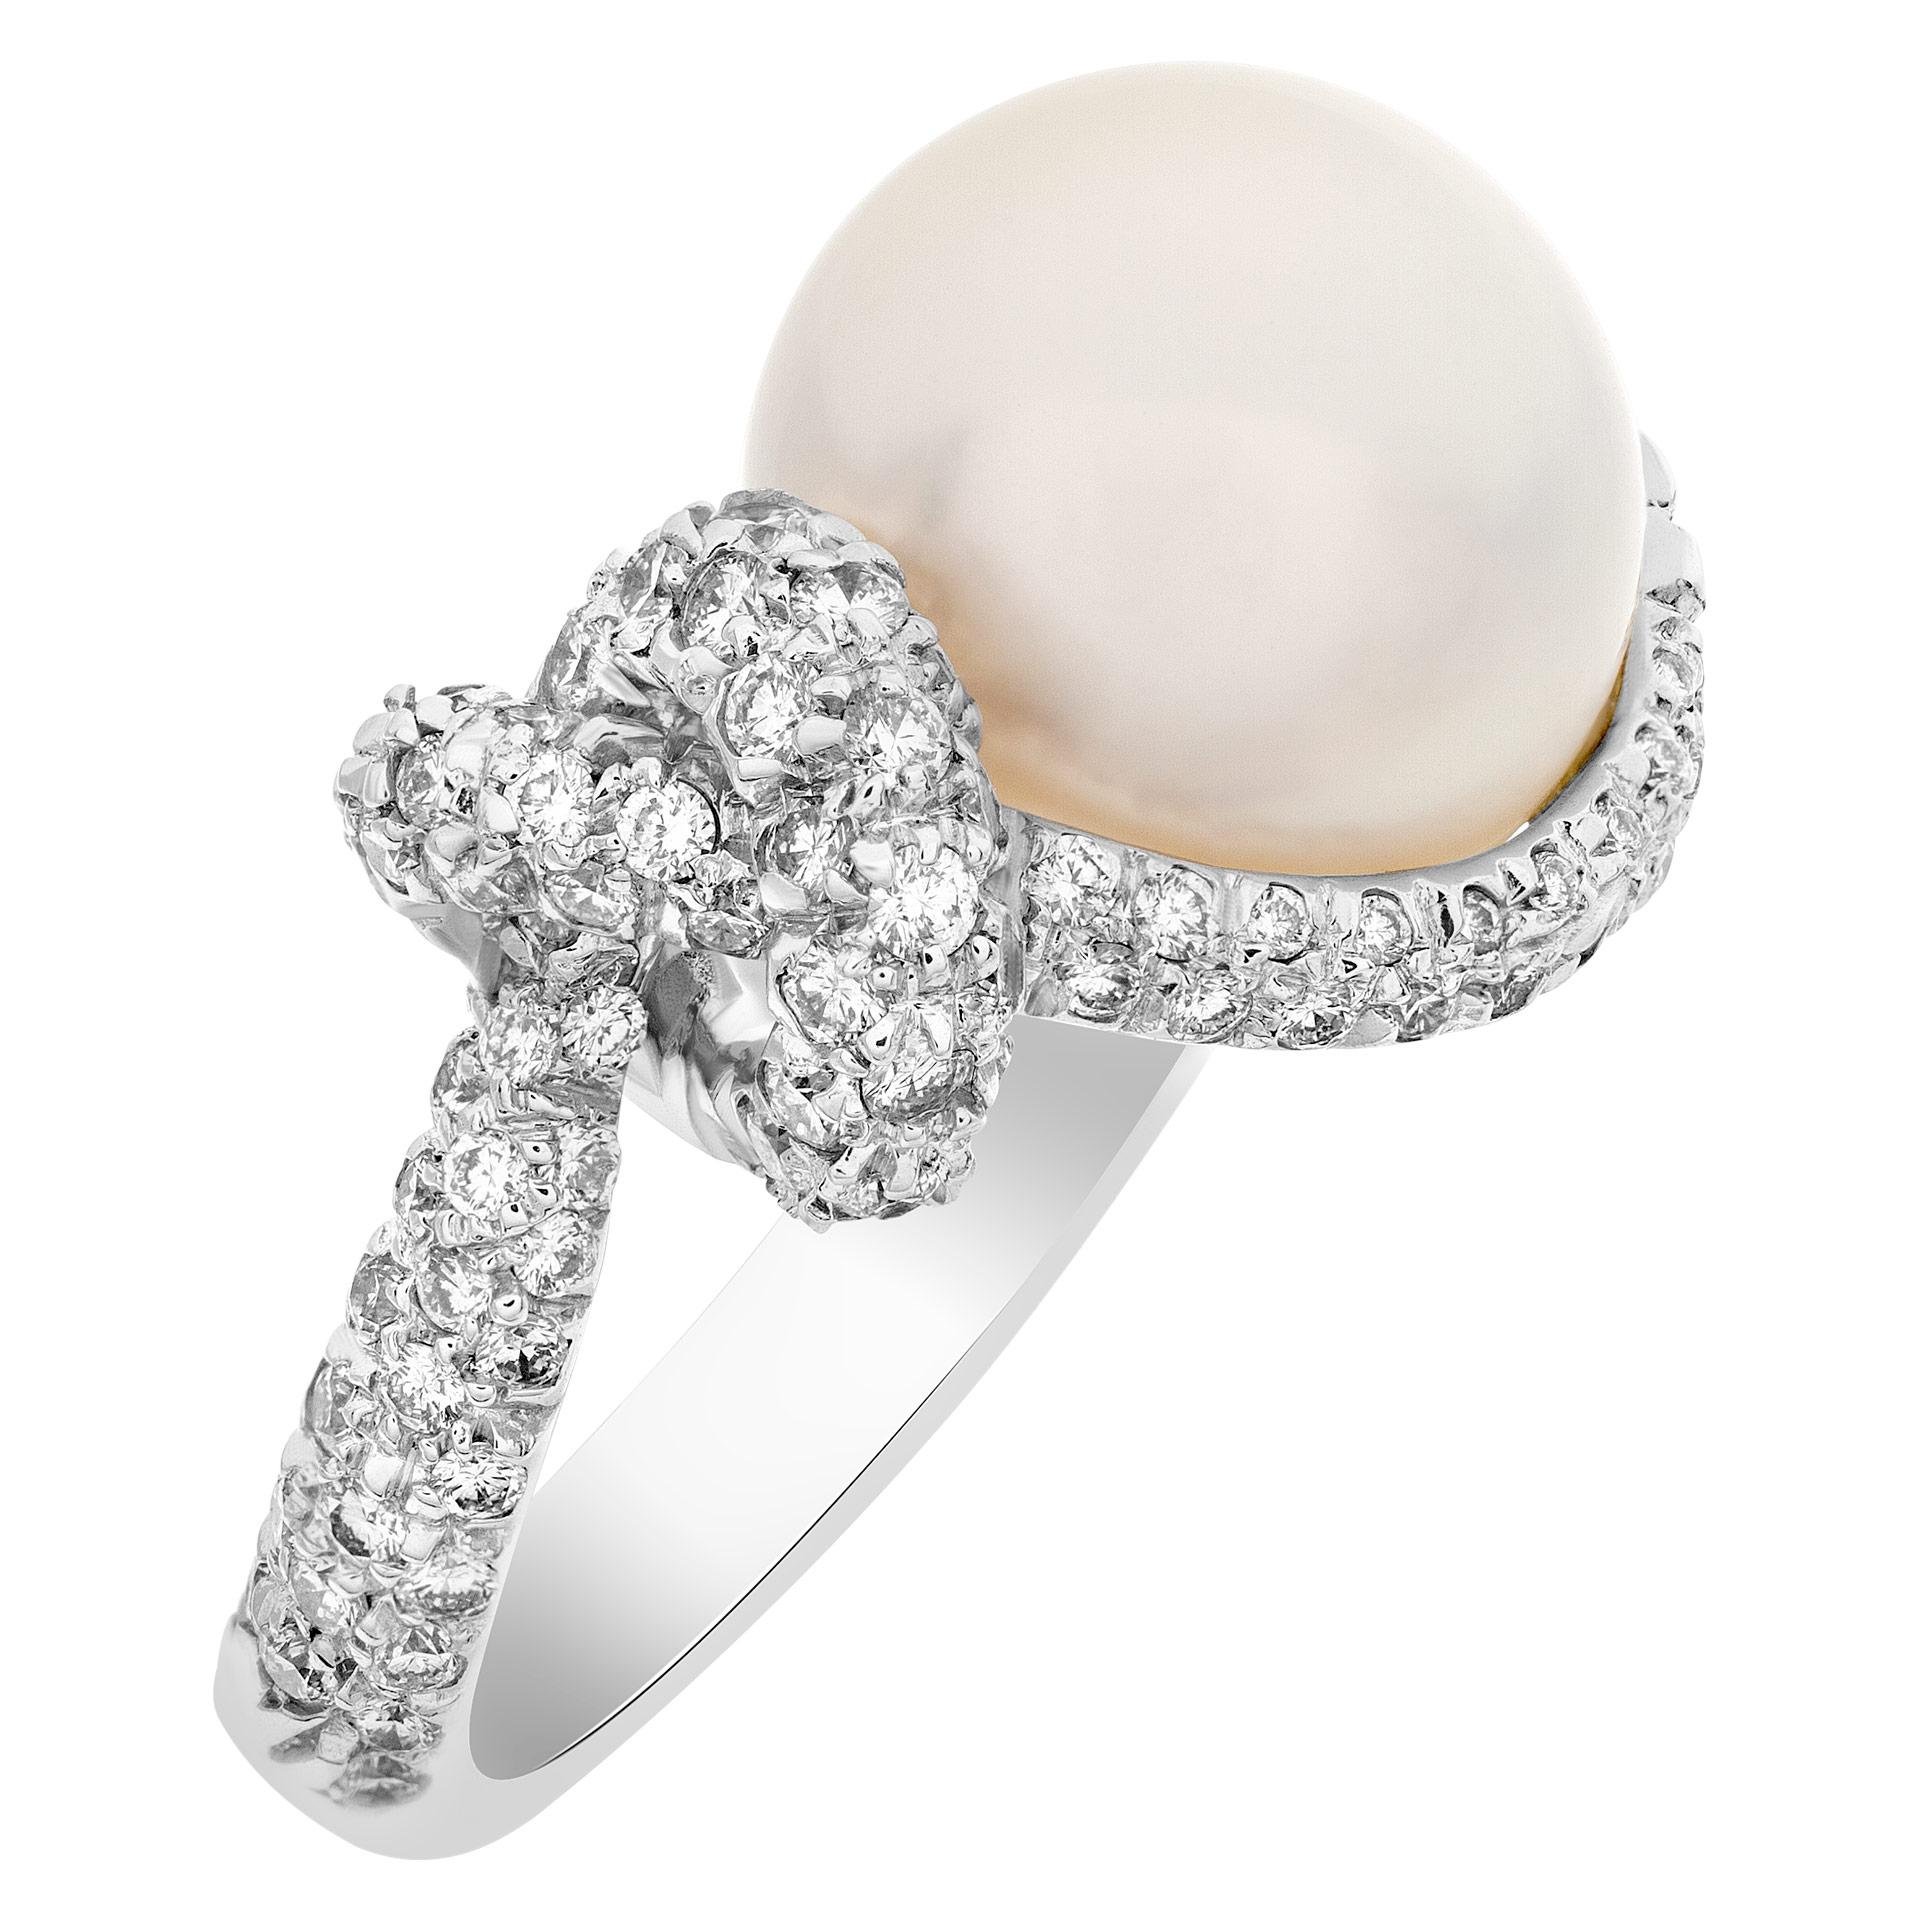 Mikimoto Milano South Sea pearl ring with a high grade, excellent luster and round shape. Pearl is 11.8mm with very clean surface with strong lacre with silver body and rose overtone. Approximately 2 carats of diamond accents in total.  Width at